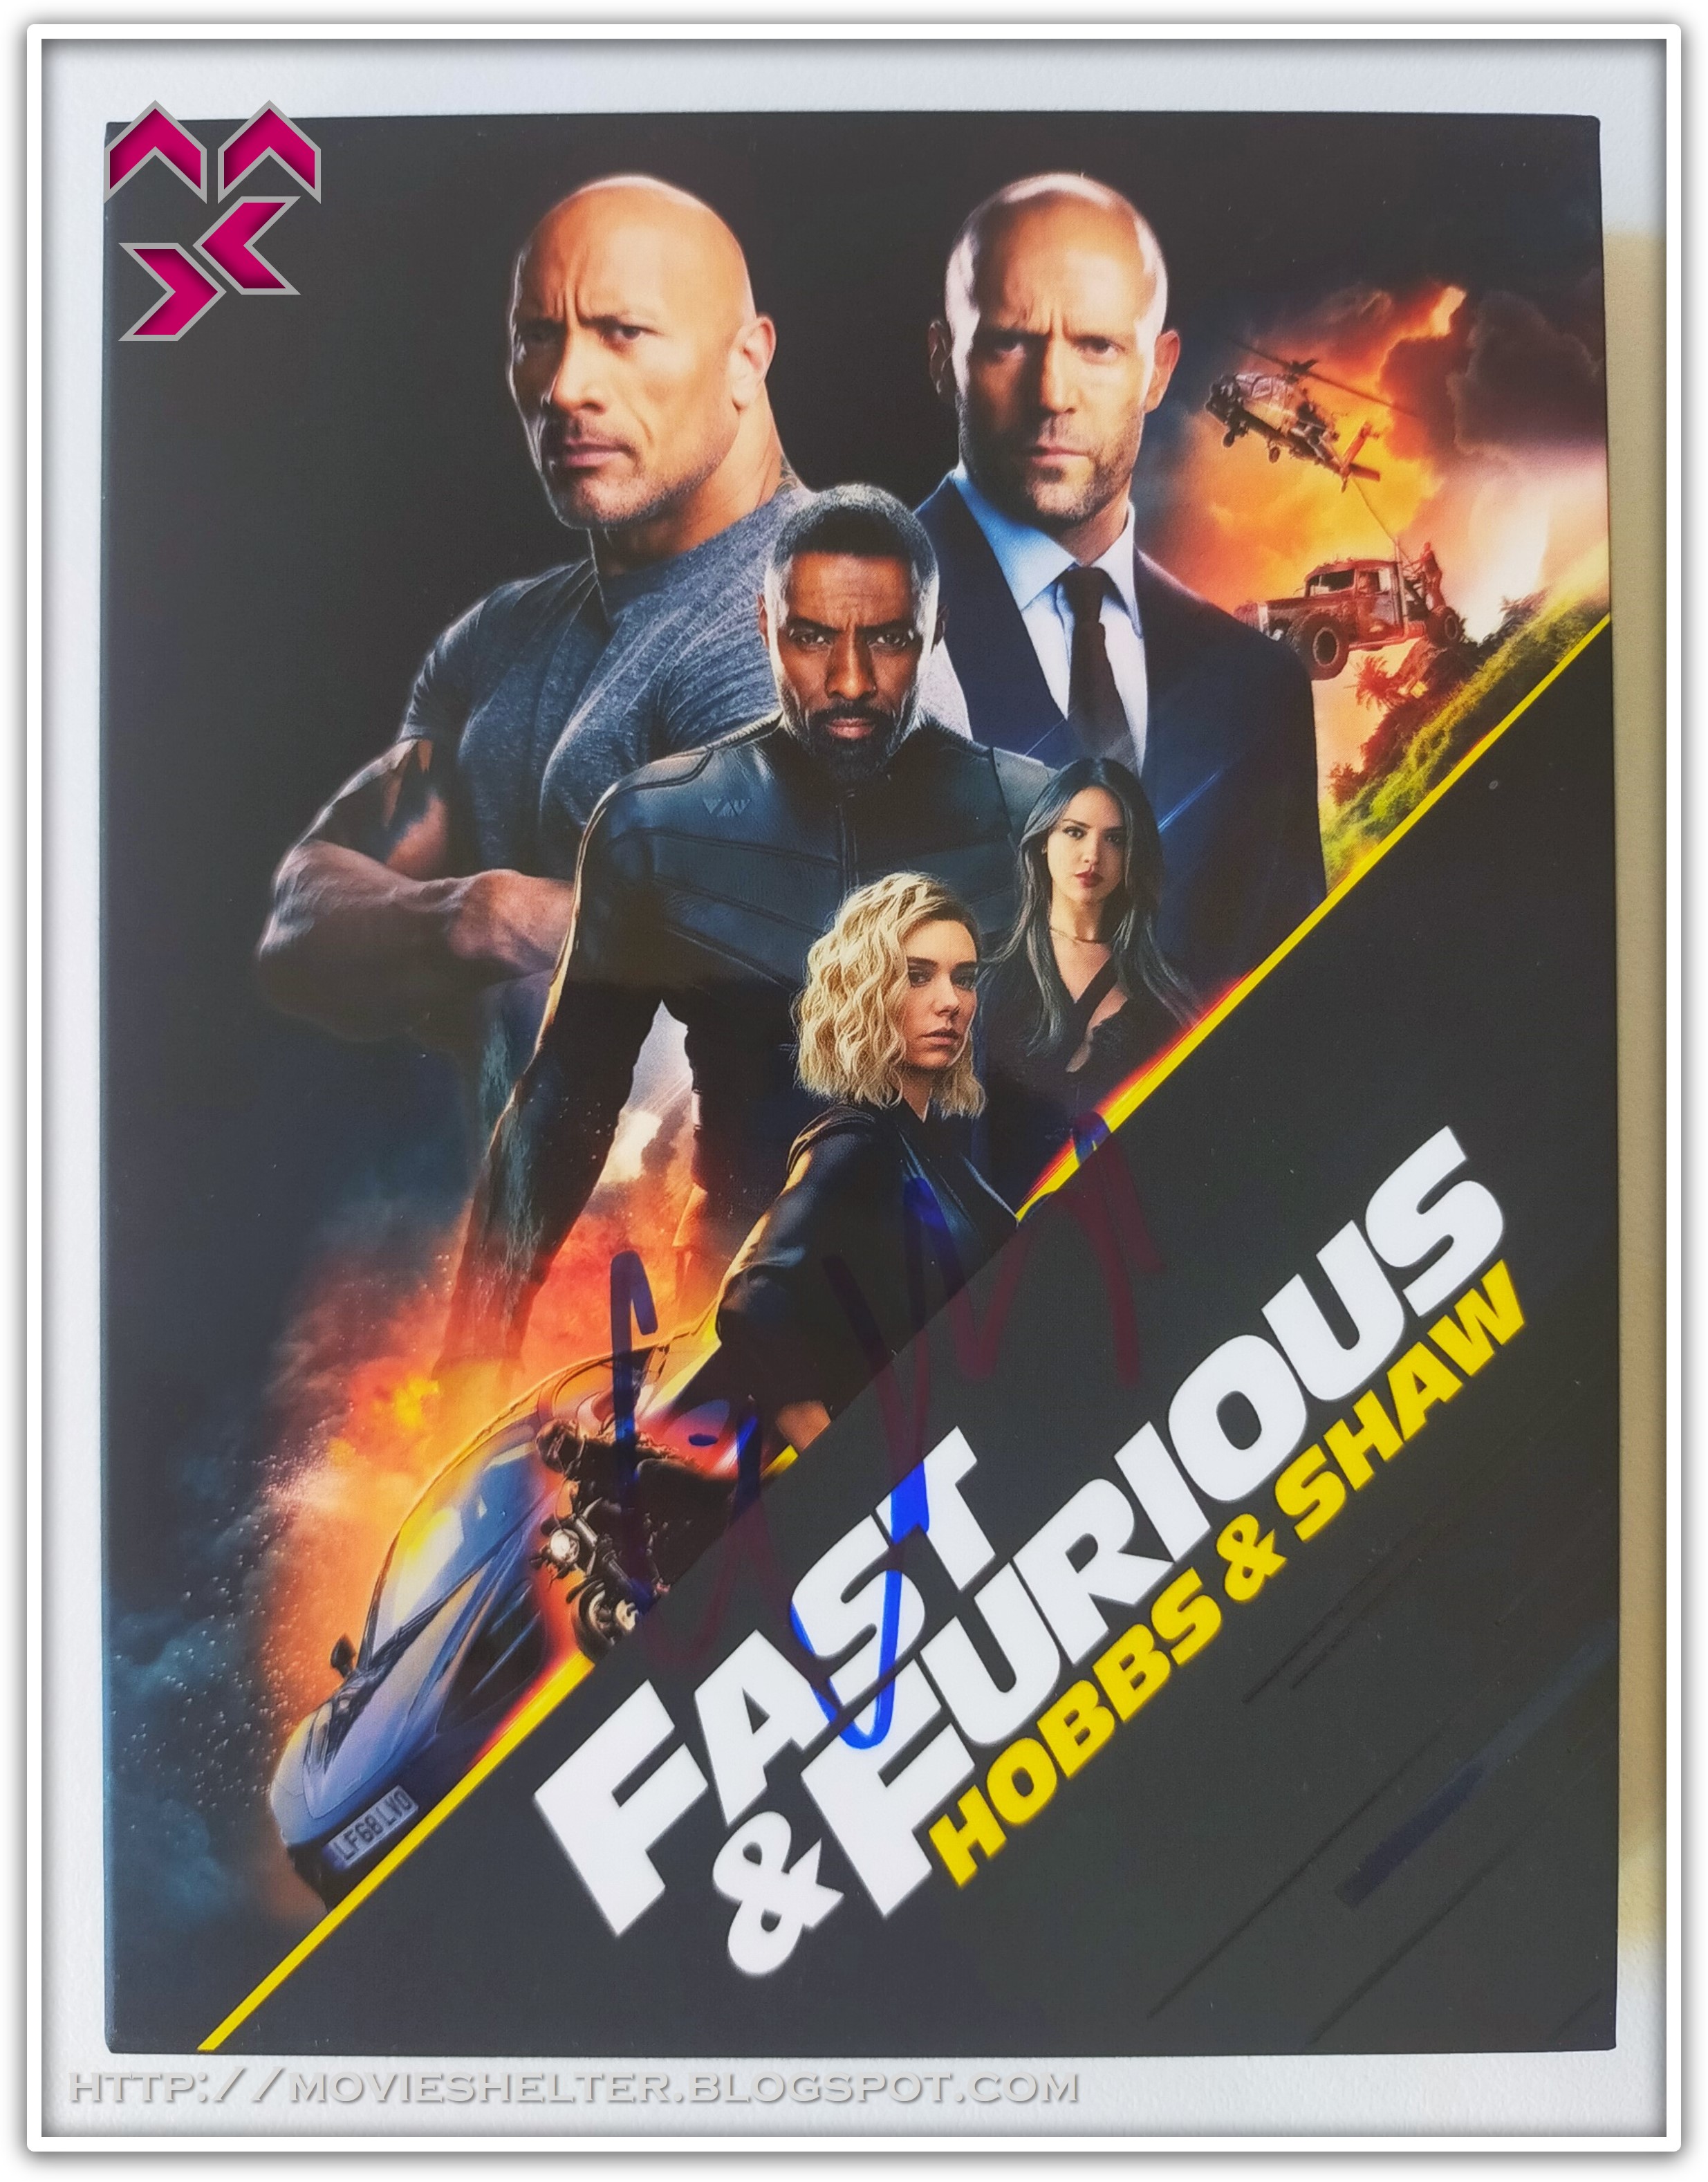 Fast_Furious_Hobbs_Shaw_Full_Slip_Limited_SteelBook_Edition_FilmArena_Collection_signed_by_Eiza_Gonz%C3%A1lez_01.jpg